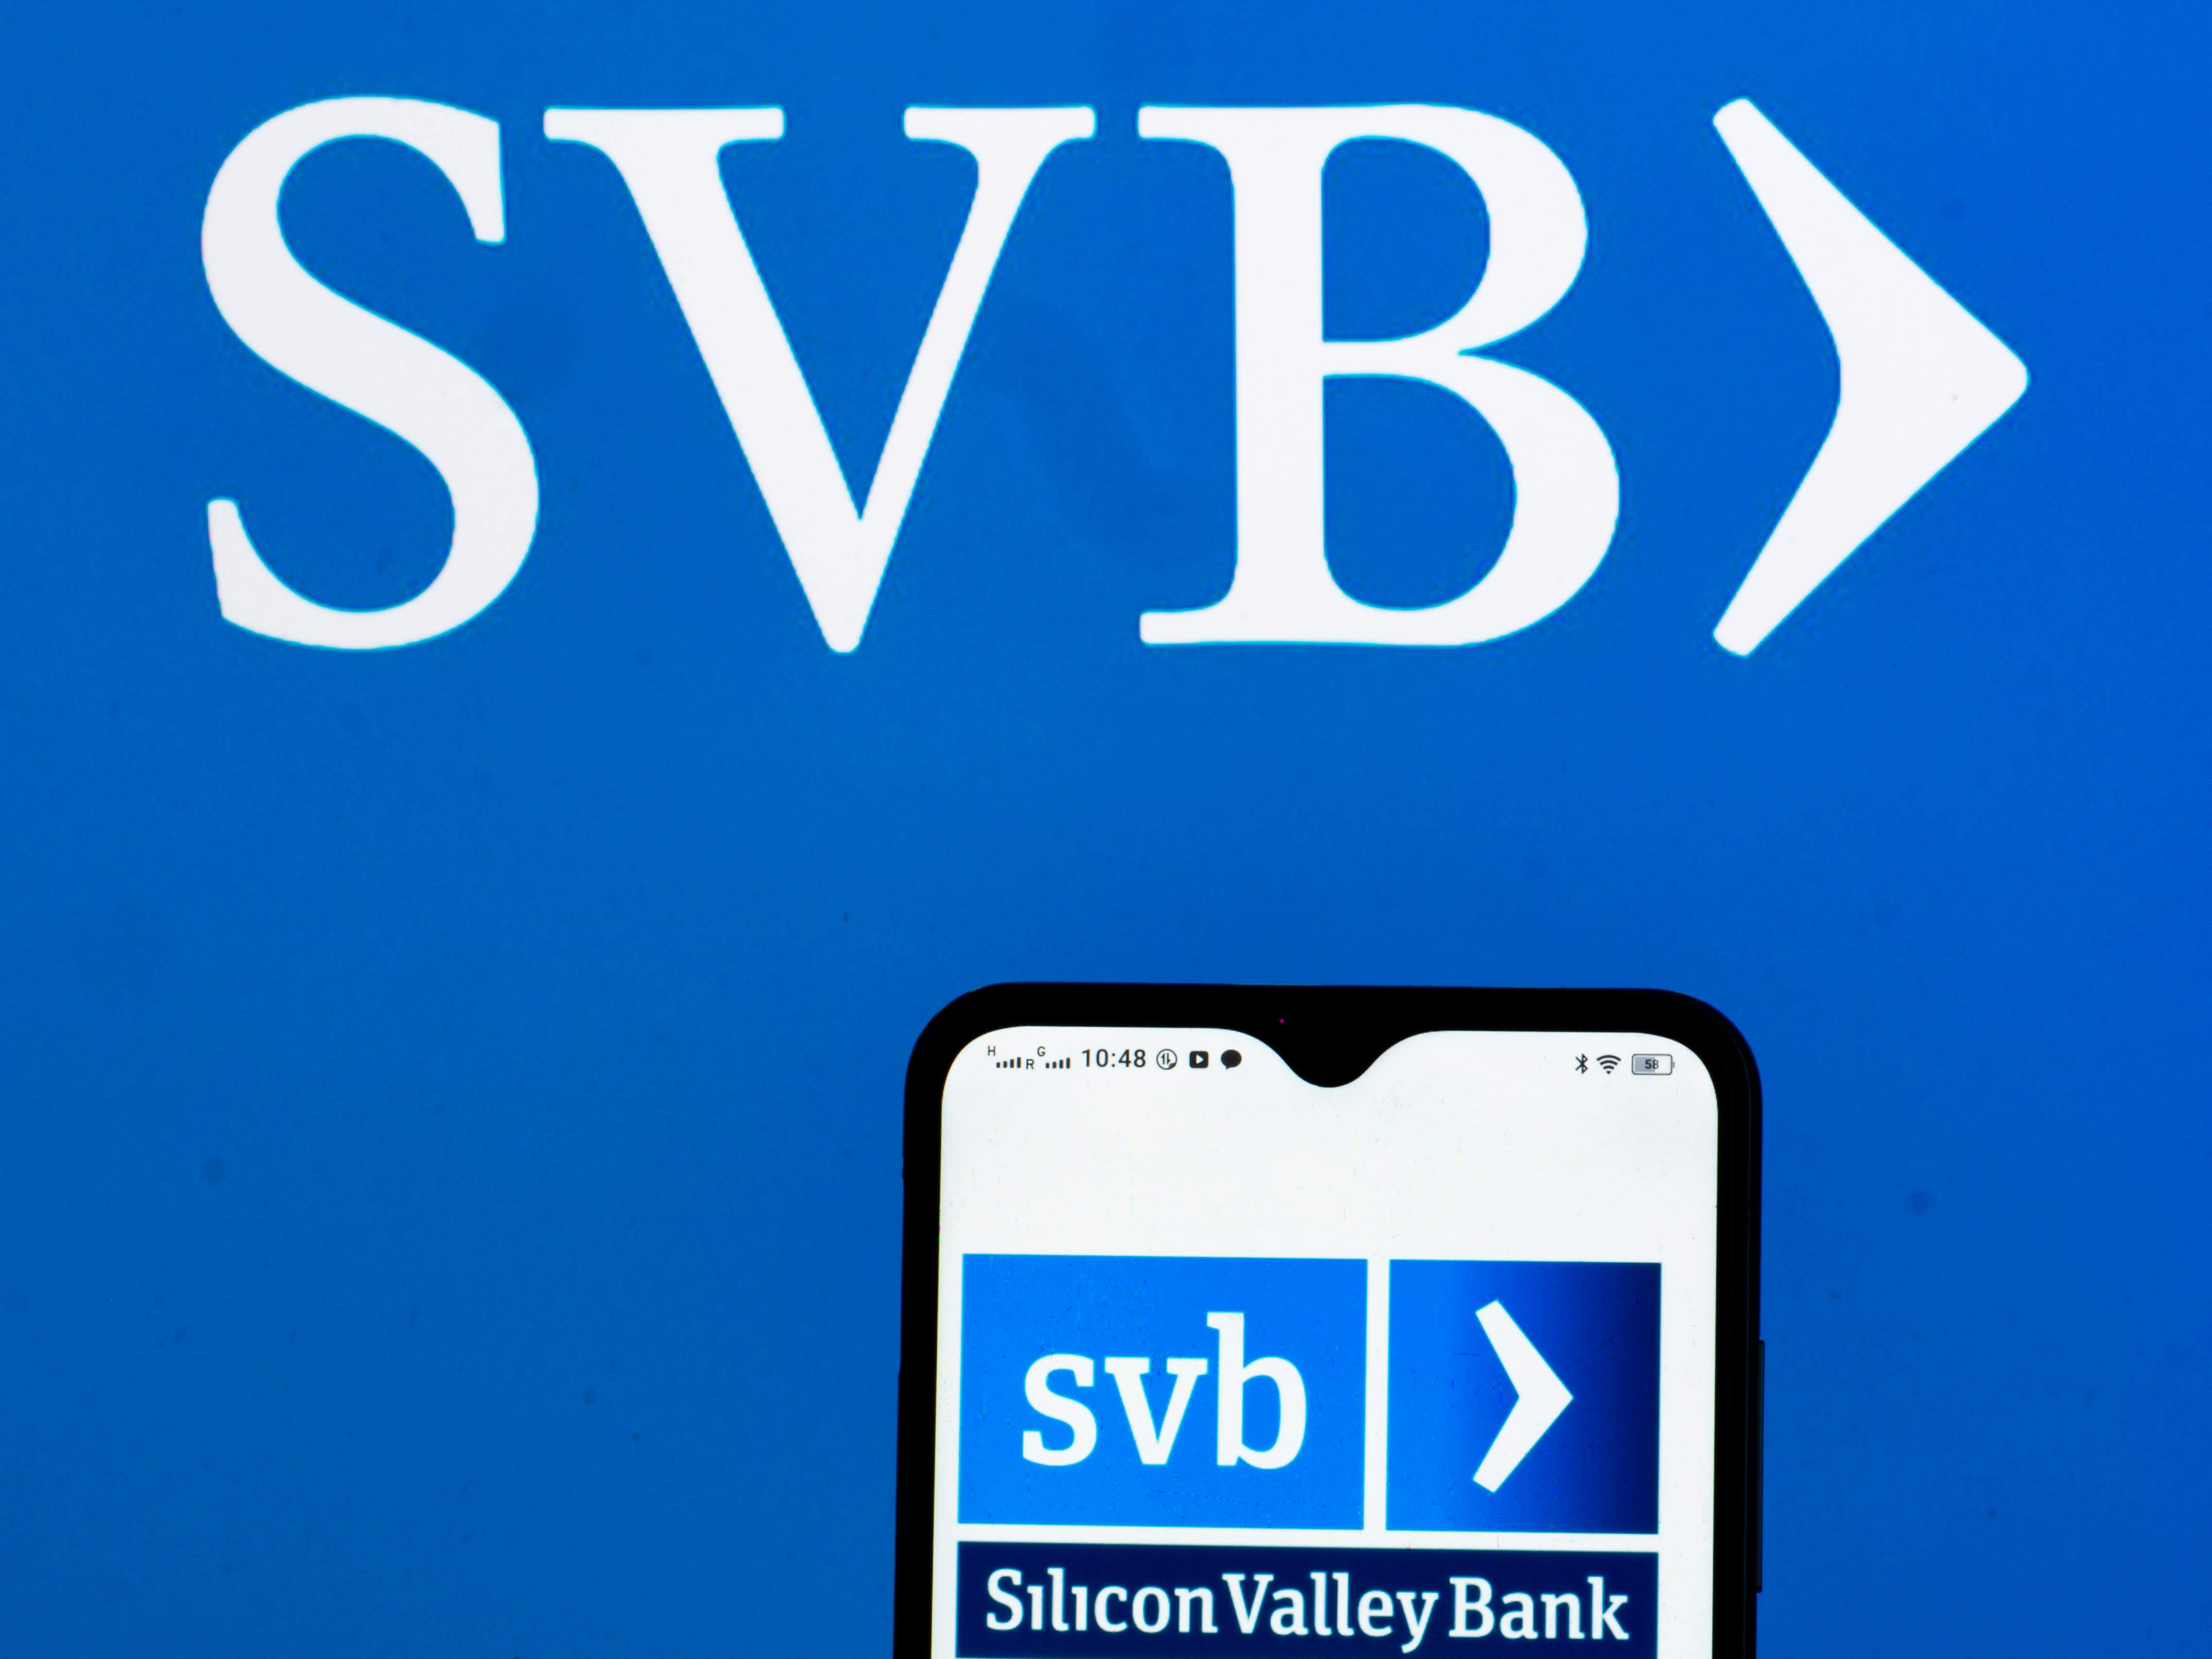 Silicon Valley Bank stock is down another 45%, which is weighing on the banking sector again